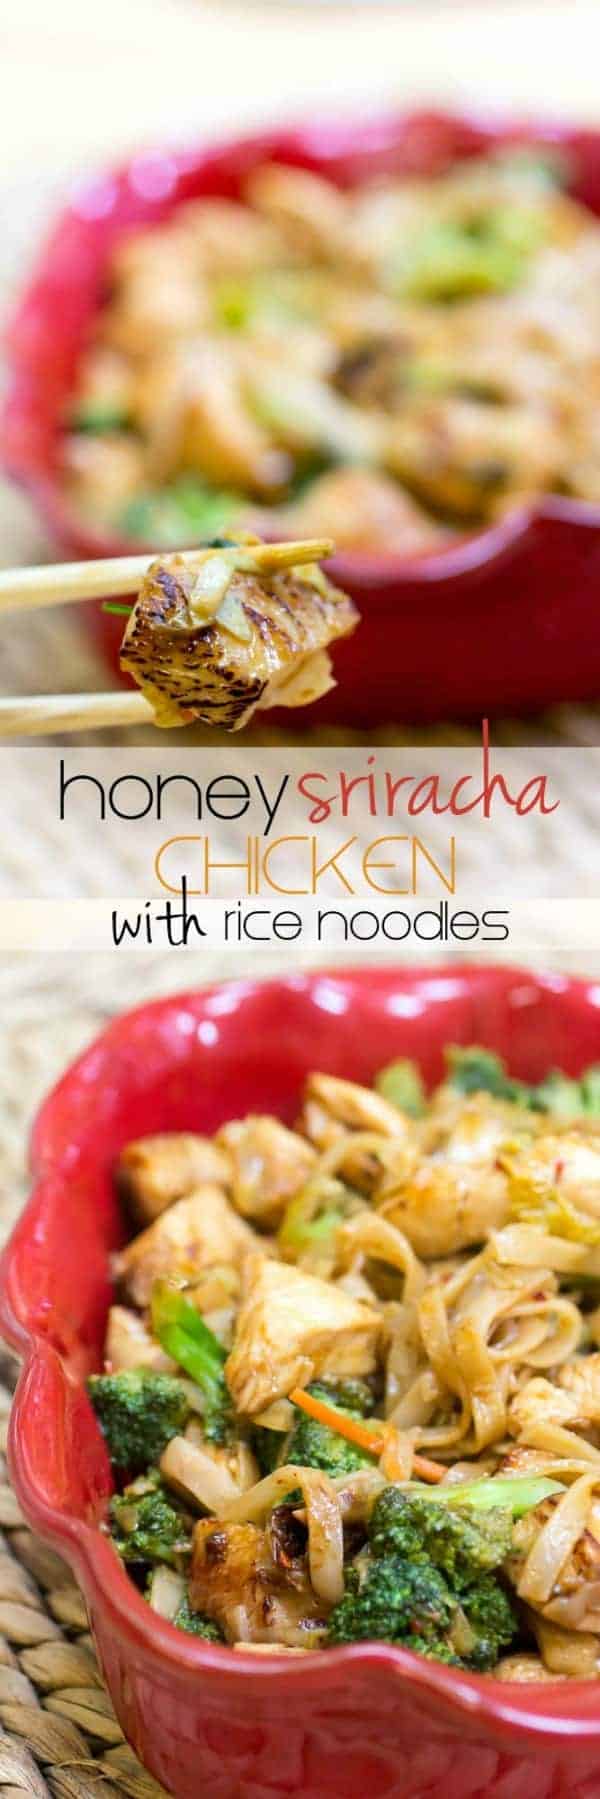 Honey Sriracha Chicken with Rice Noodles